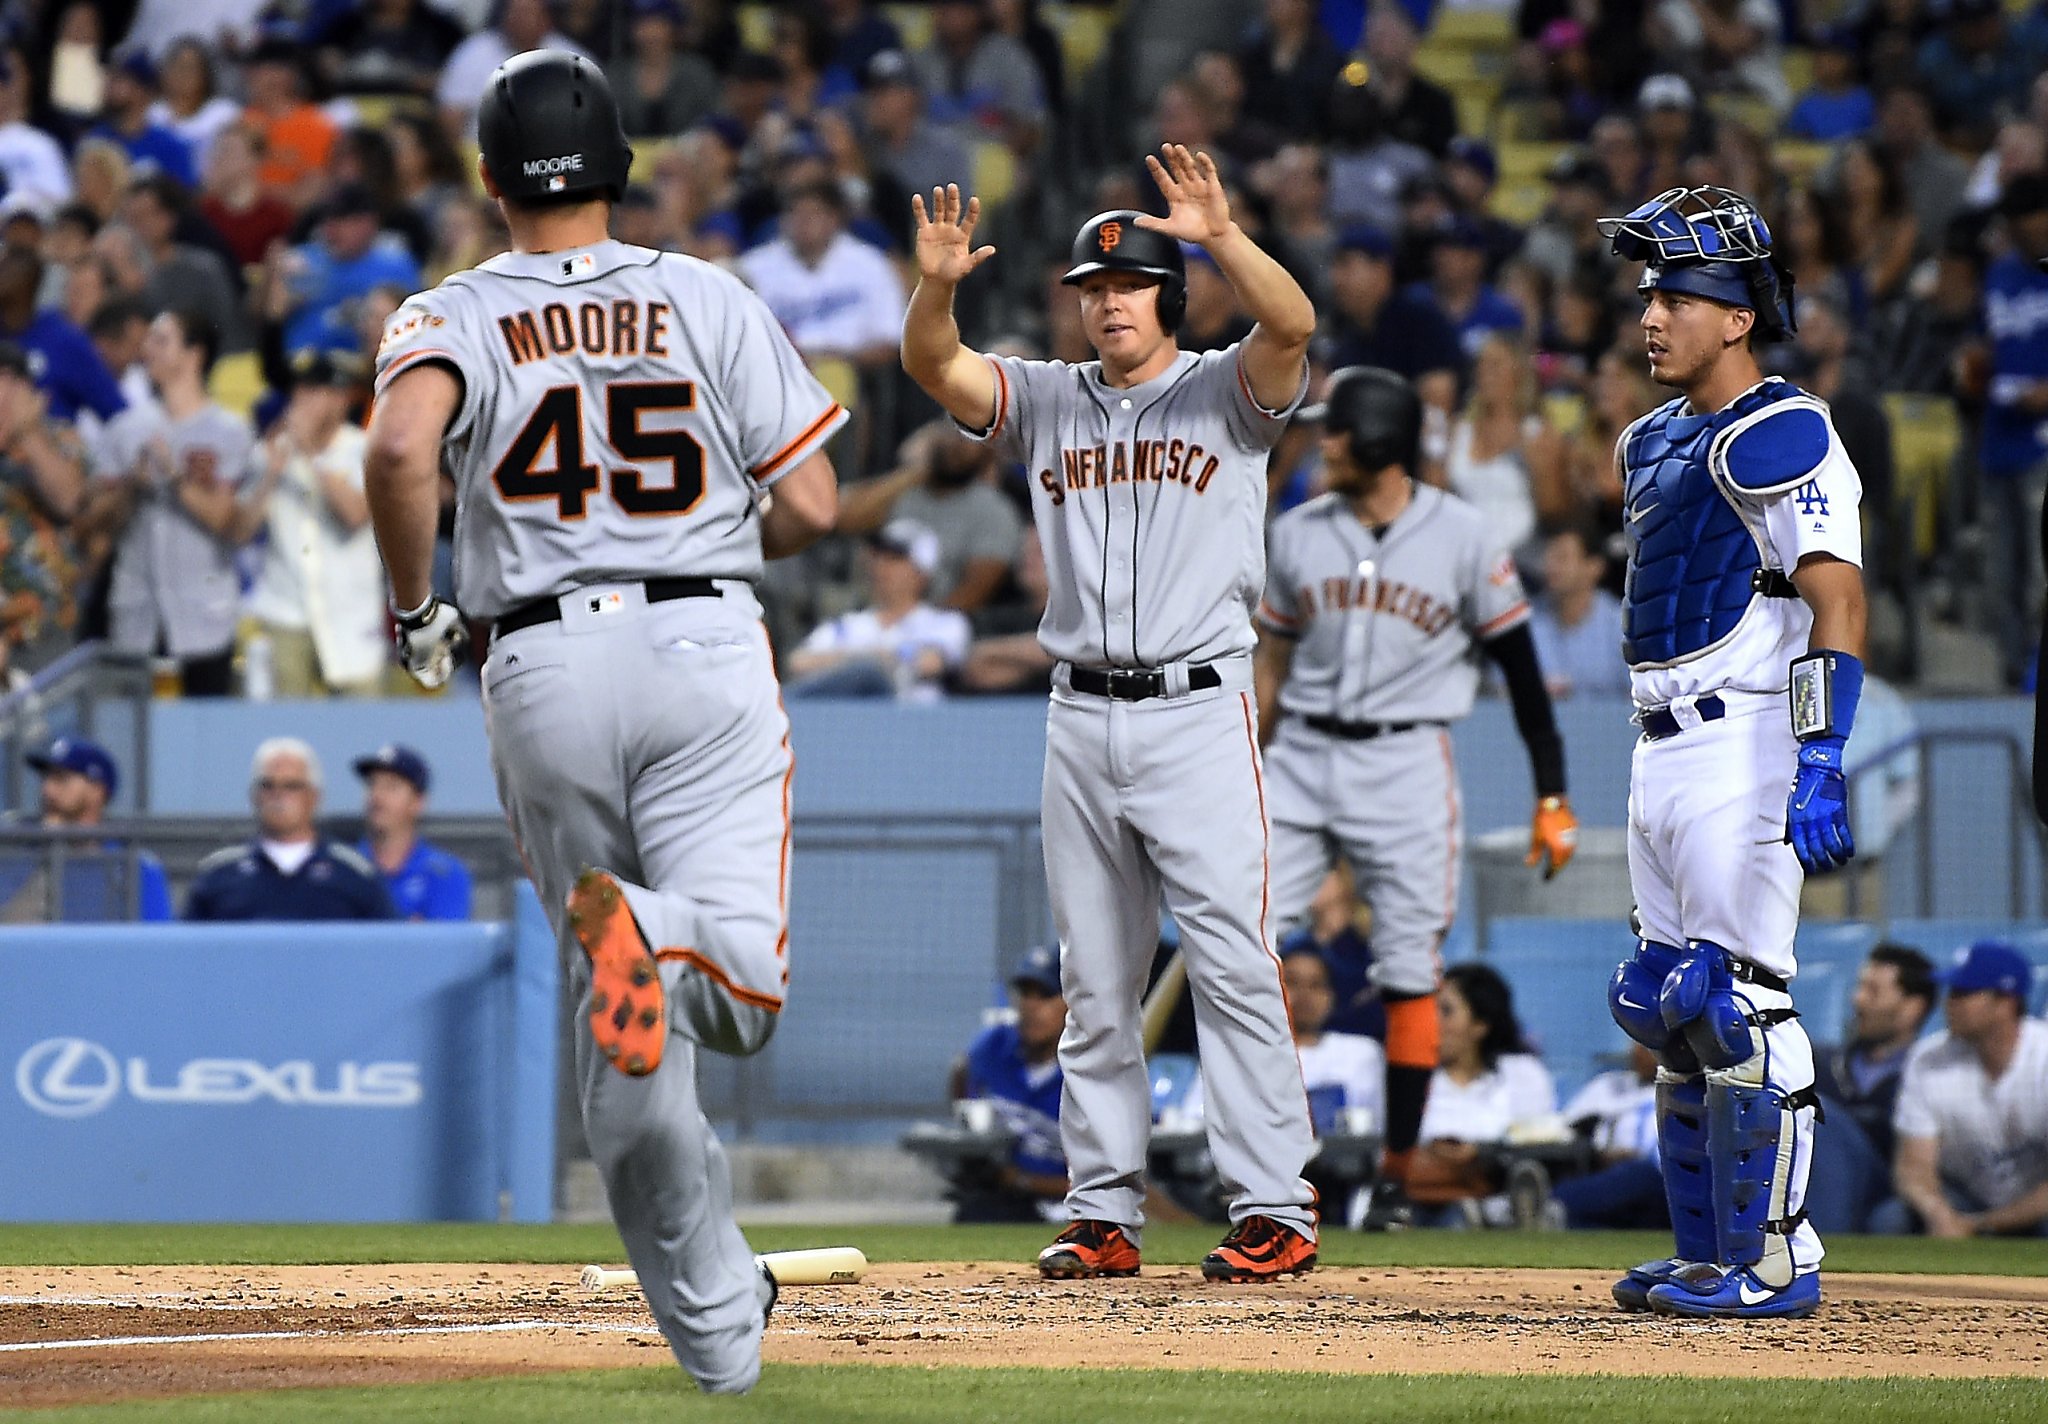 Giants fan becomes instant legend by trolling Dodgers on live TV - SFGate